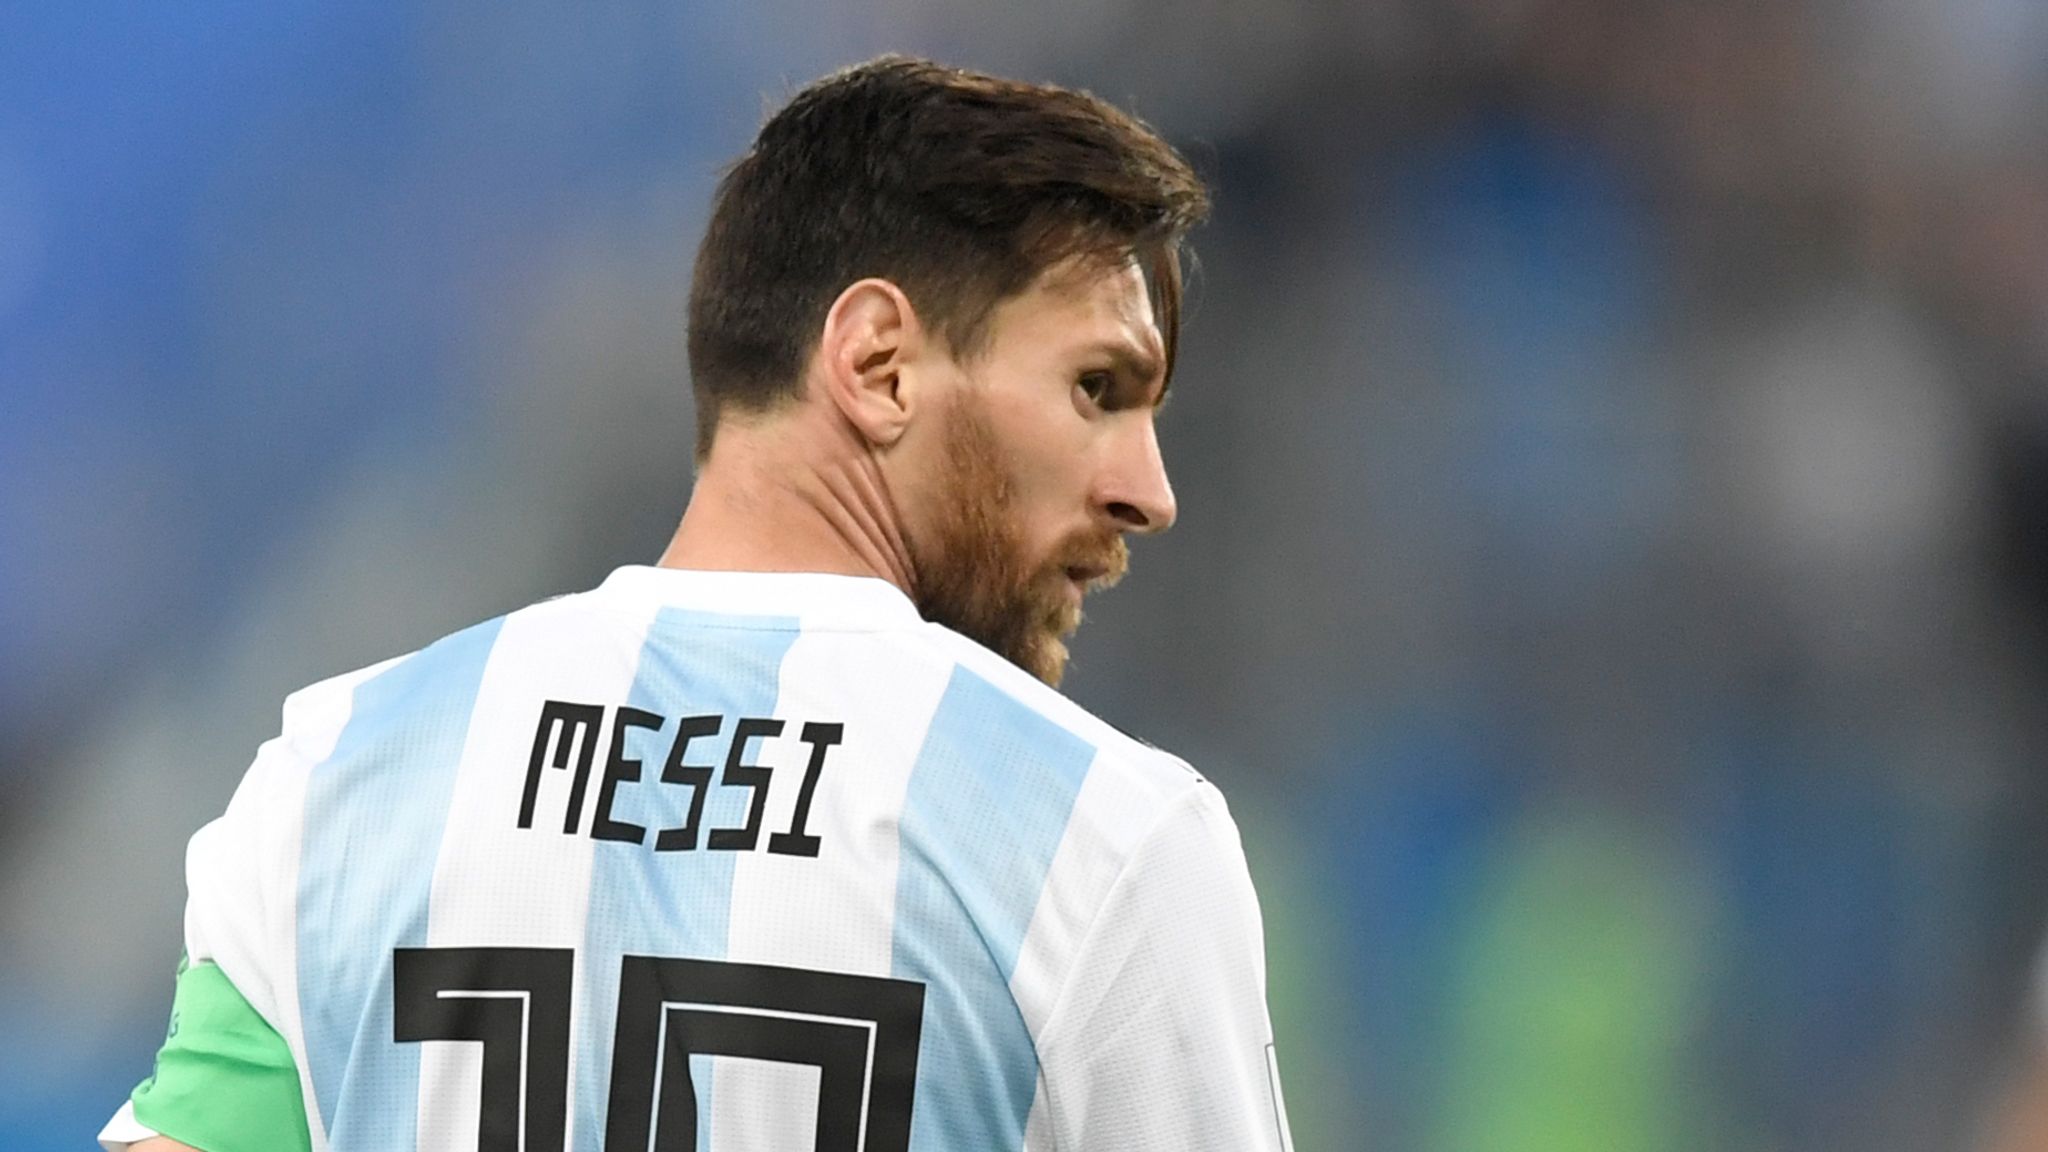 Messi has been the tournament’s outstanding player